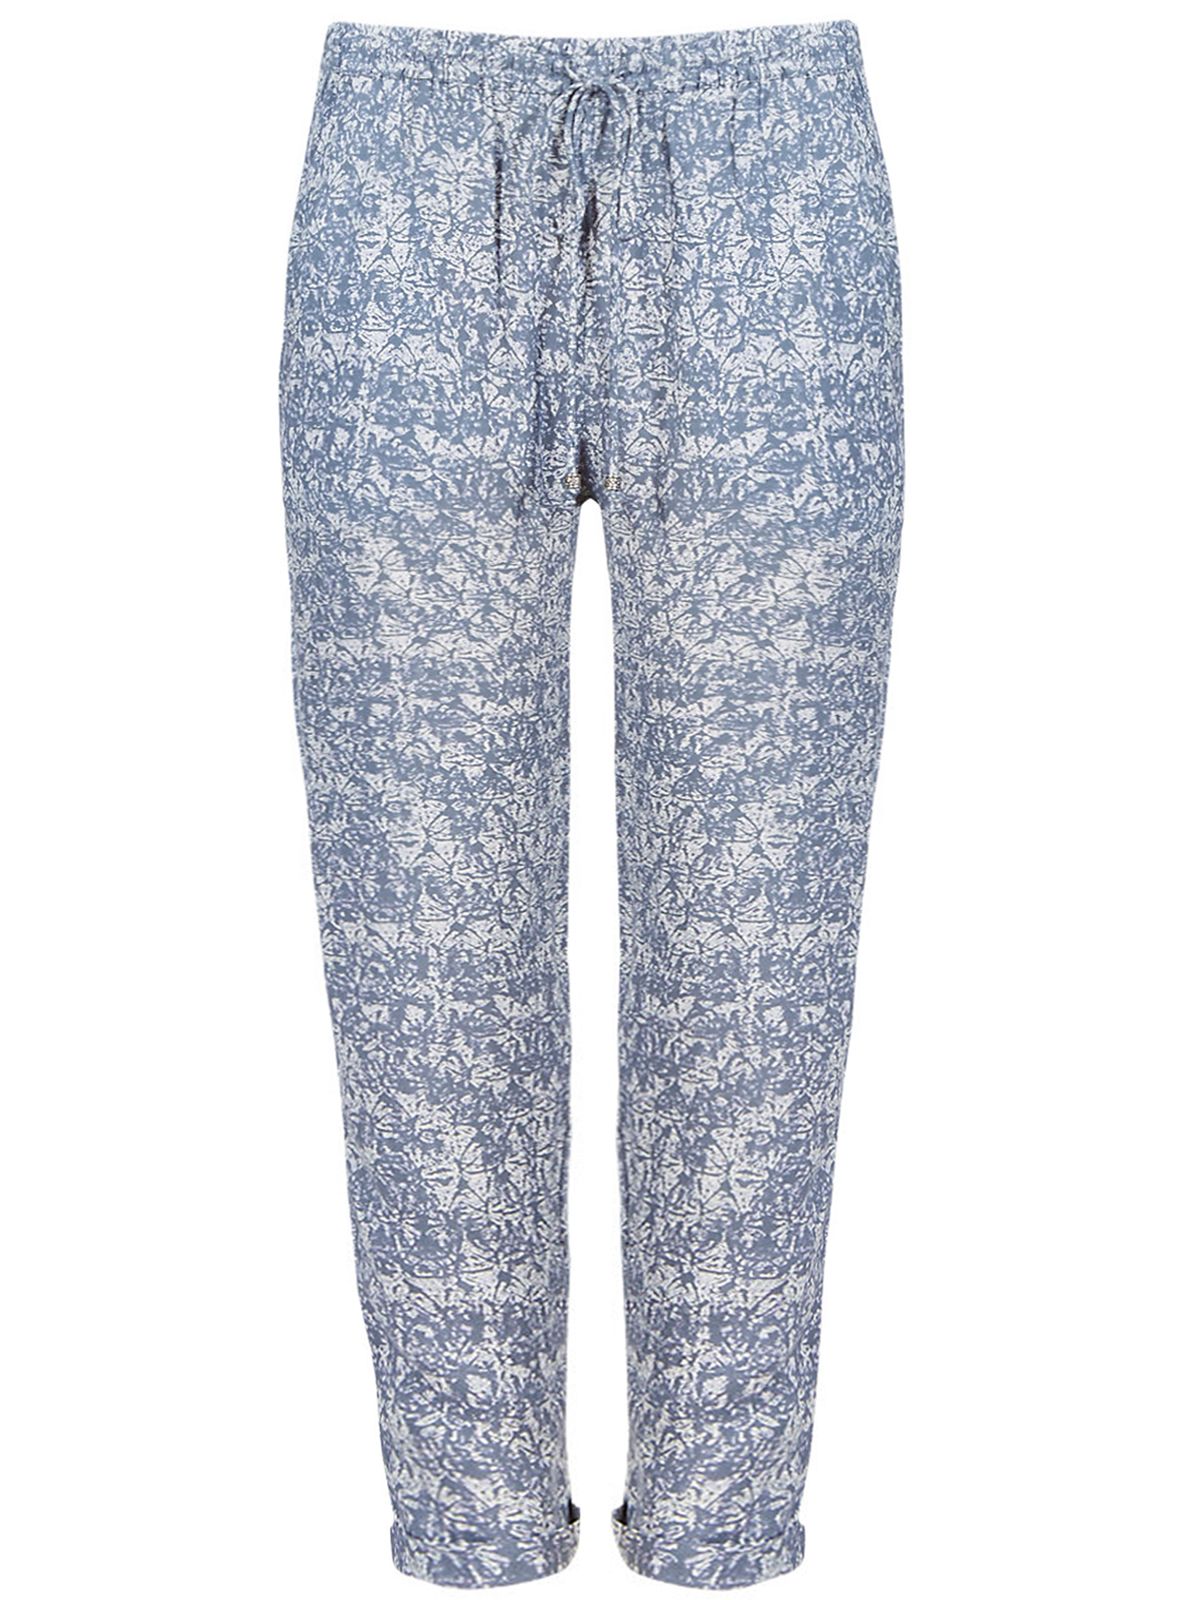 Marks and Spencer - - M&5 BLUE Abstract Print Tapered Leg Trousers ...